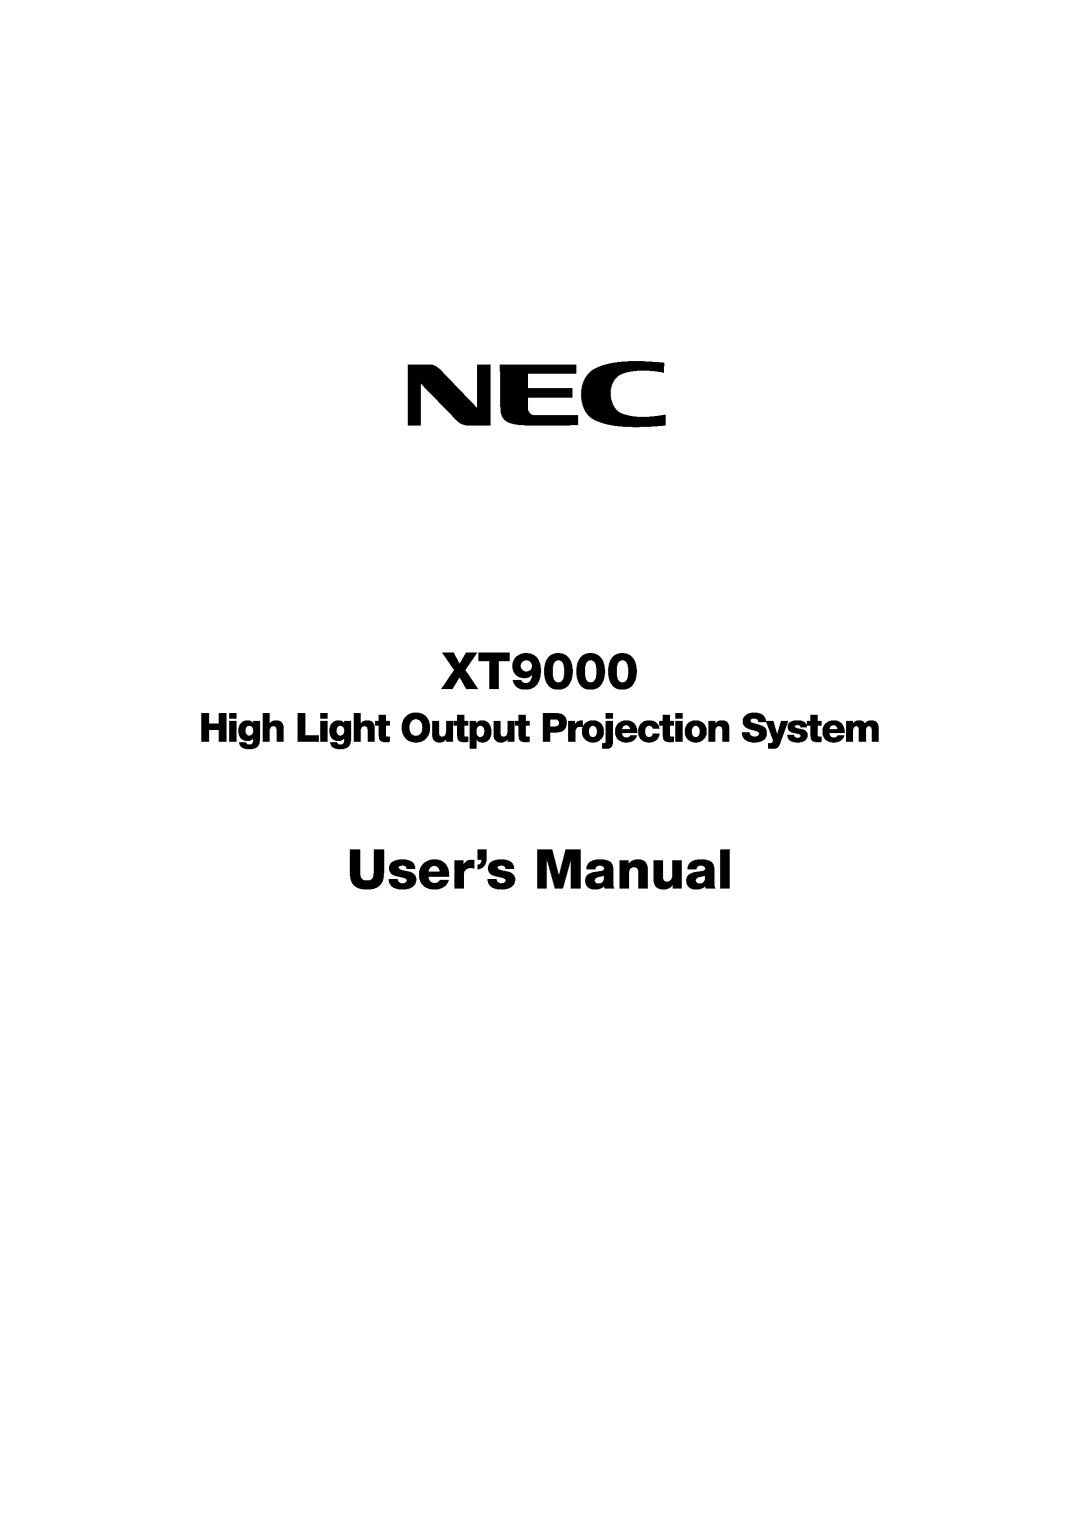 NEC XT9000 user manual User’s Manual, High Light Output Projection System 